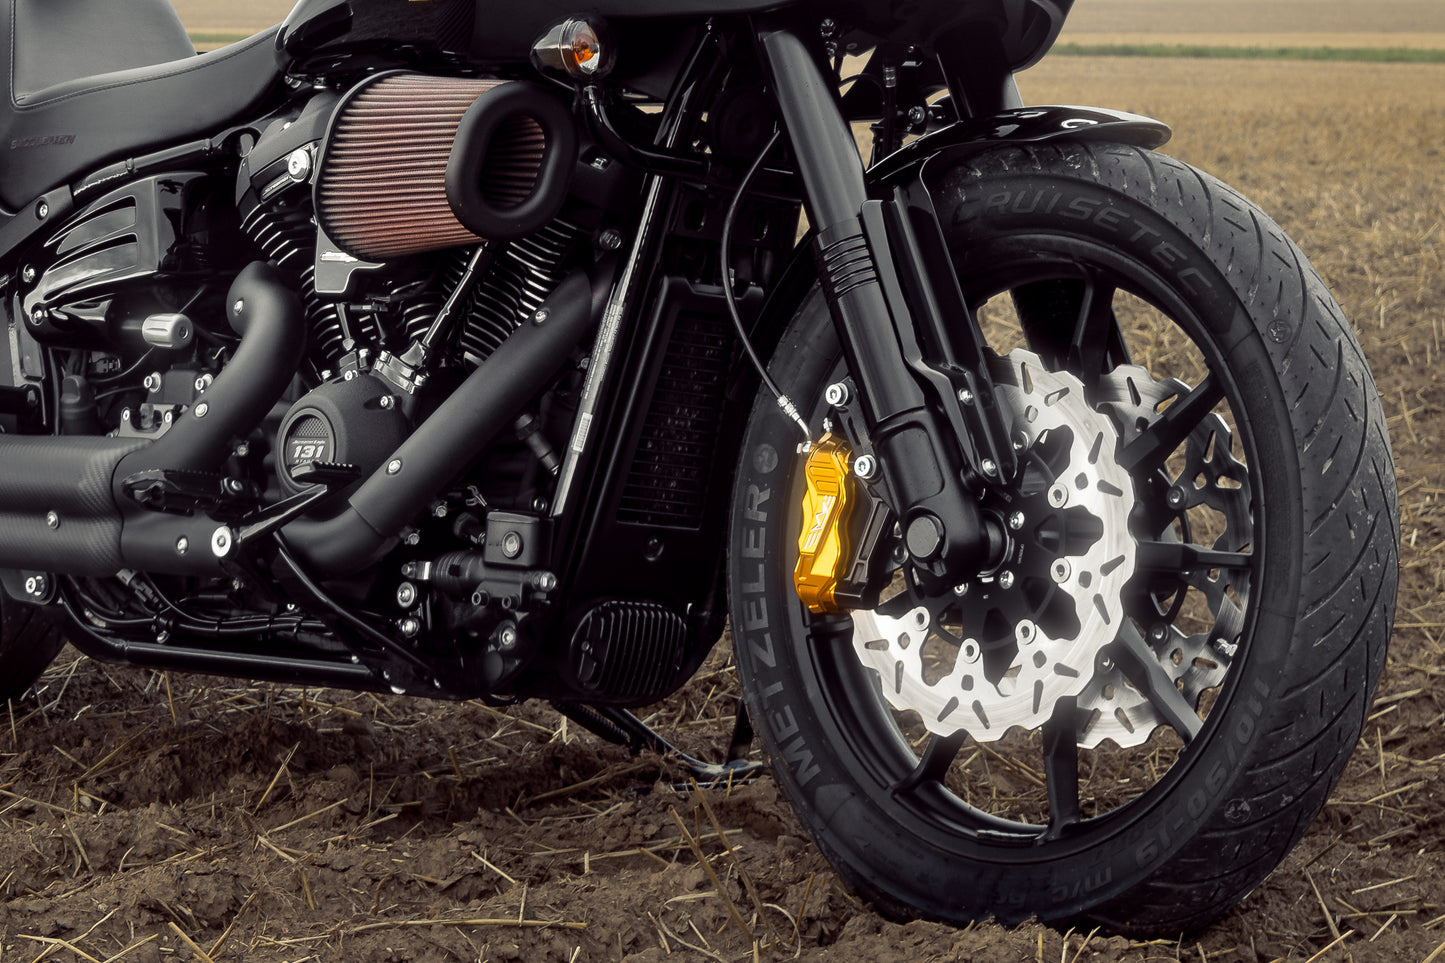 Harley Davidson motorcycle with Killer Custom fat bob and low ride lower fork covers in a nature environment